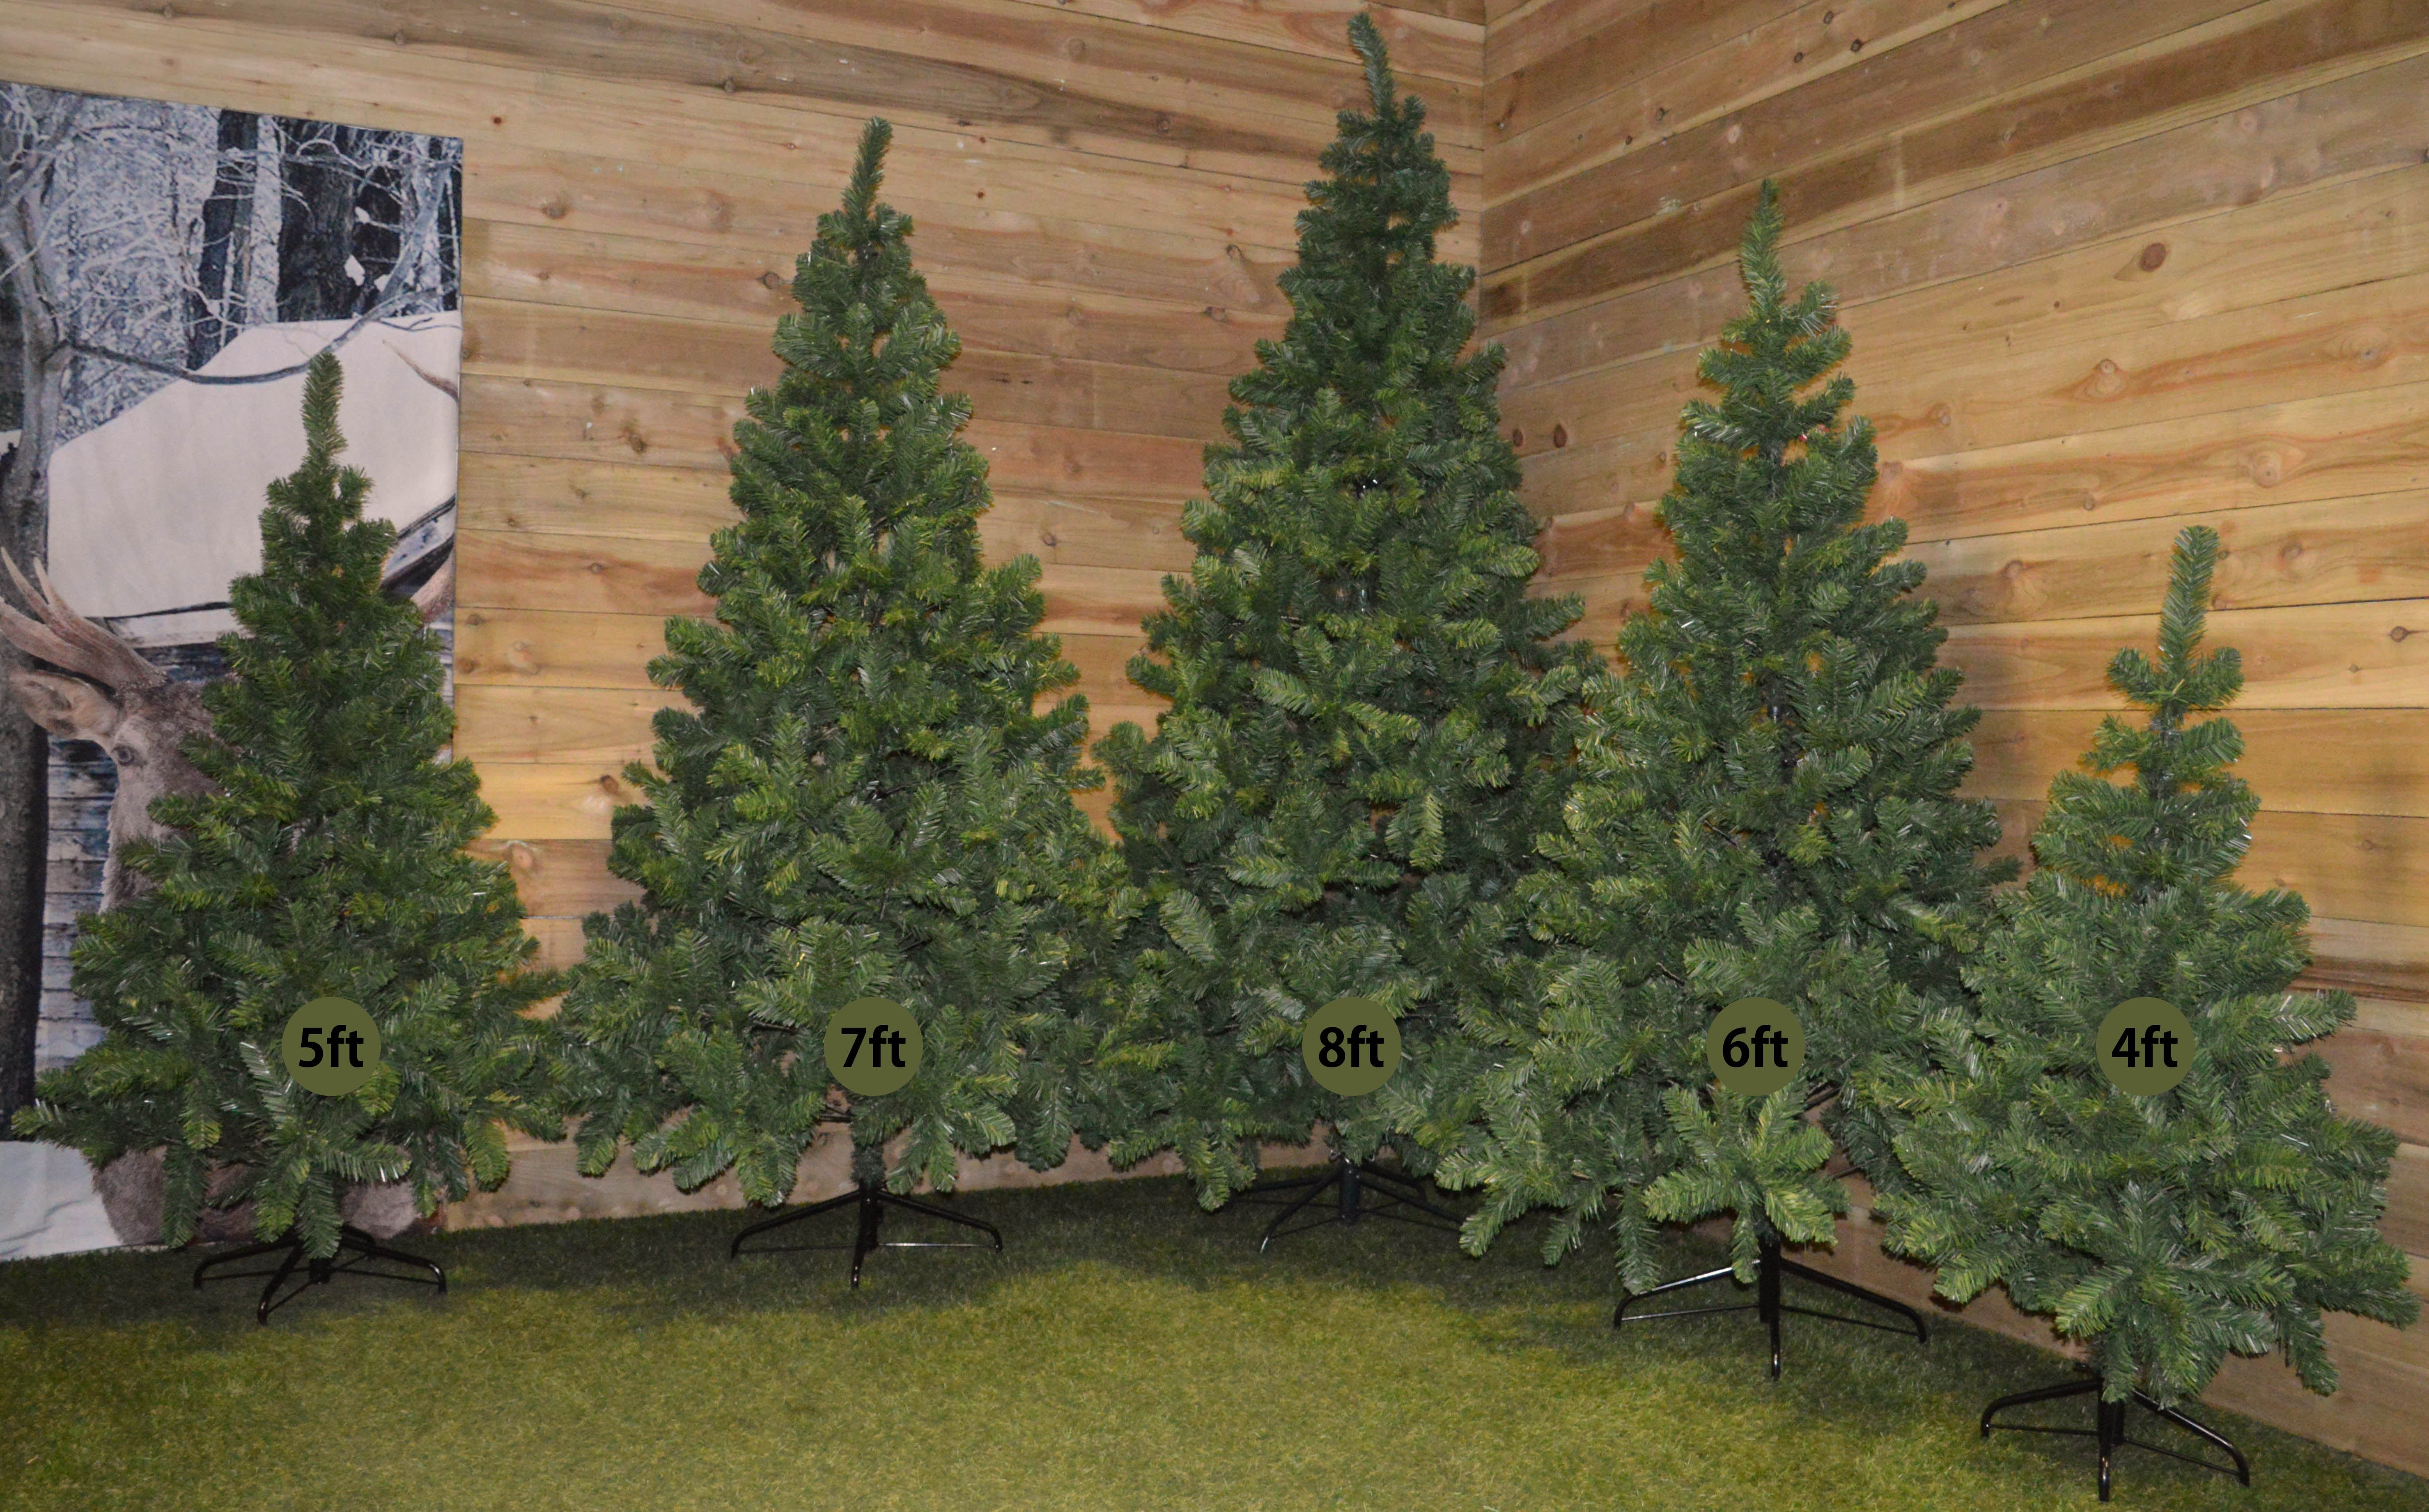 5ft (150cm) Imperial Pine Christmas Tree in Green with 340 tips 95cm Diameter